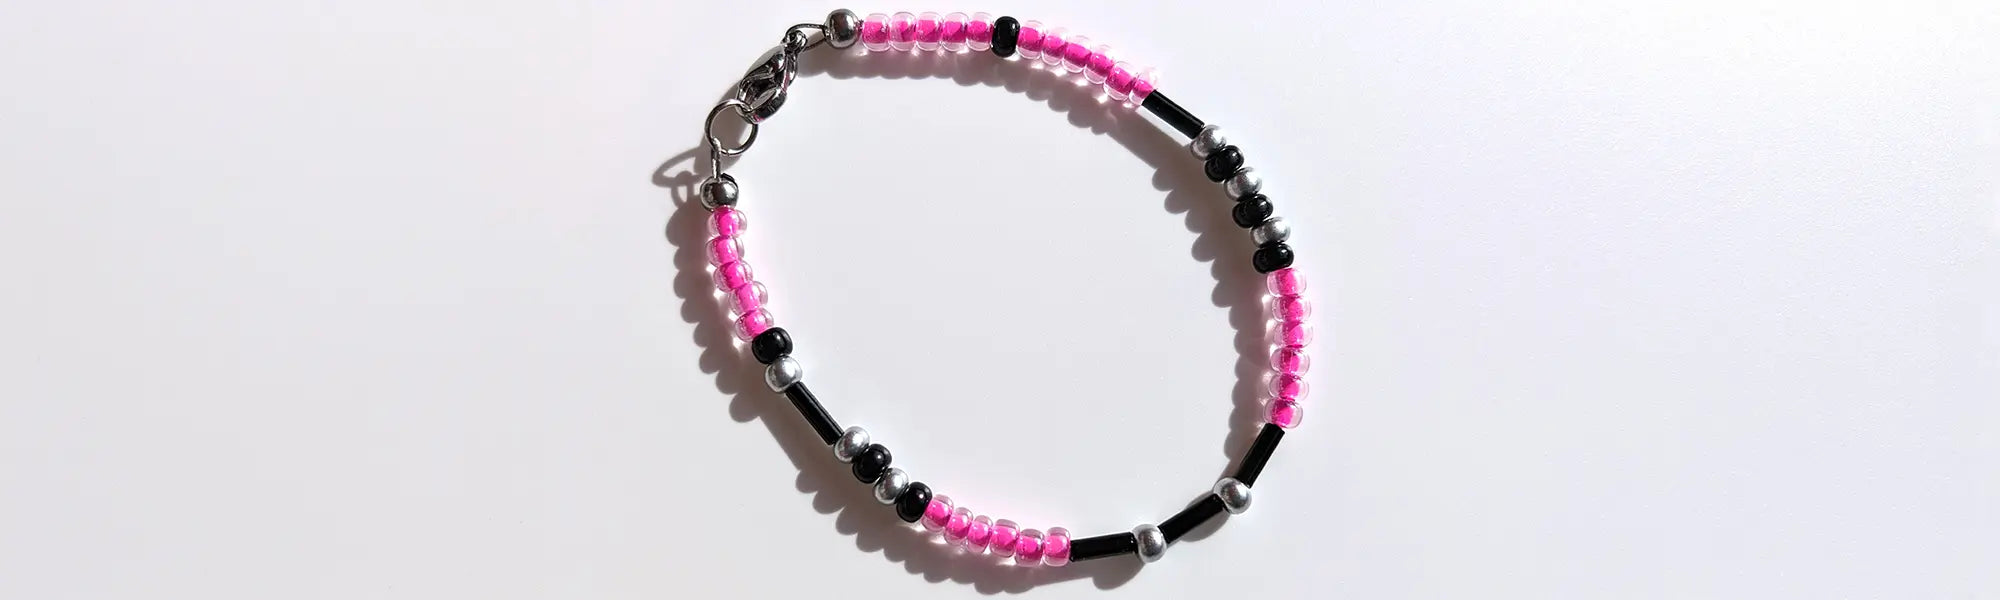 Playful Bubblegum Shimmer Morse code bracelet, handcrafted with fun and flirty pink & silver Czech glass beads, holds the secret message “Love.”